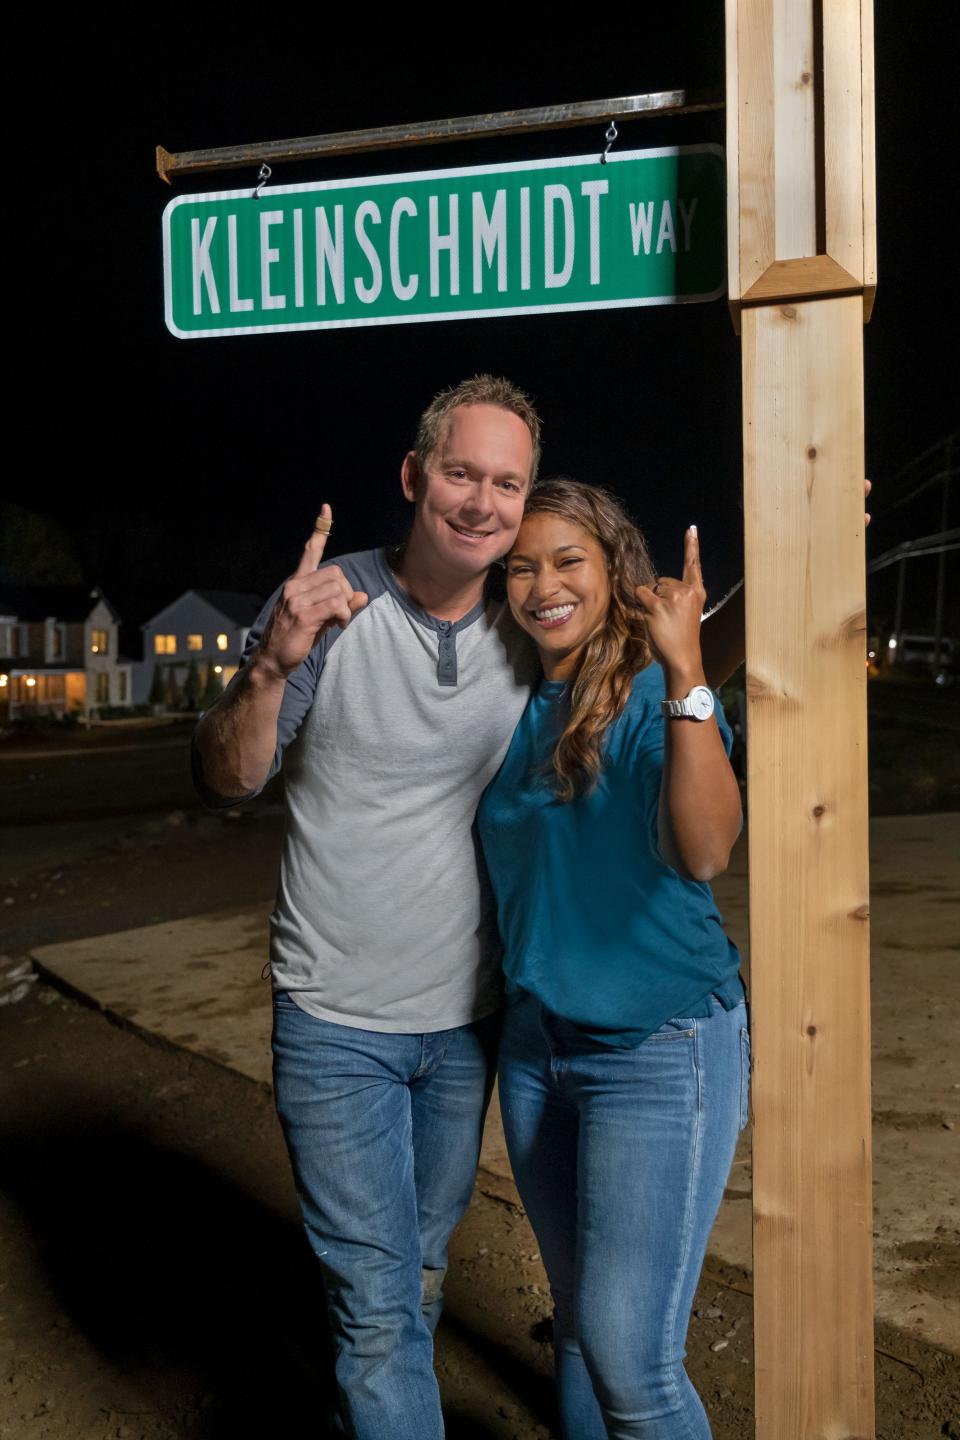 Brian and Mika Kleinschmidt, the Tampa Bay home builders who host “100 Day Dream Home,” were judged the winners of the second season of HGTV’s “Rock the Block” and had a street named for them outside the new house they renovated.